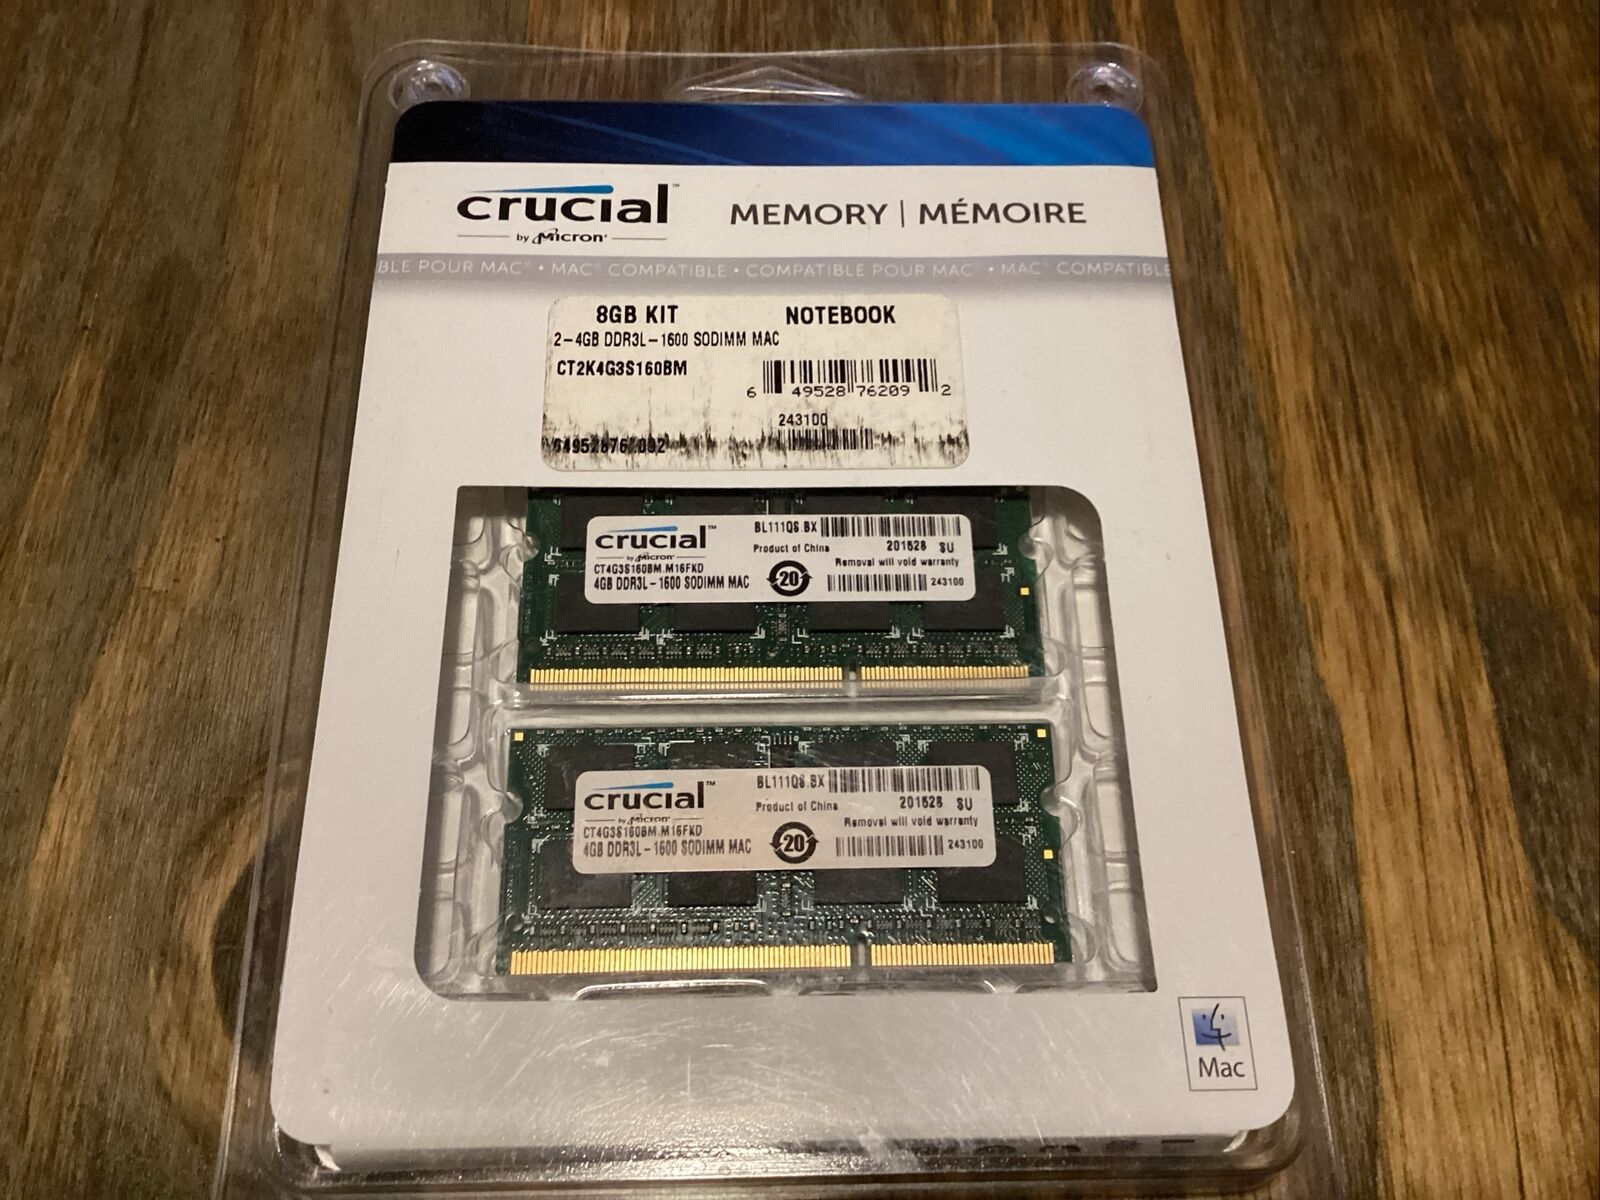 CRUCIAL Memory by Micron 8GB KIT 2-4GB Notebook DDR3L 1600 SODIMM CT2K4G3S160BM